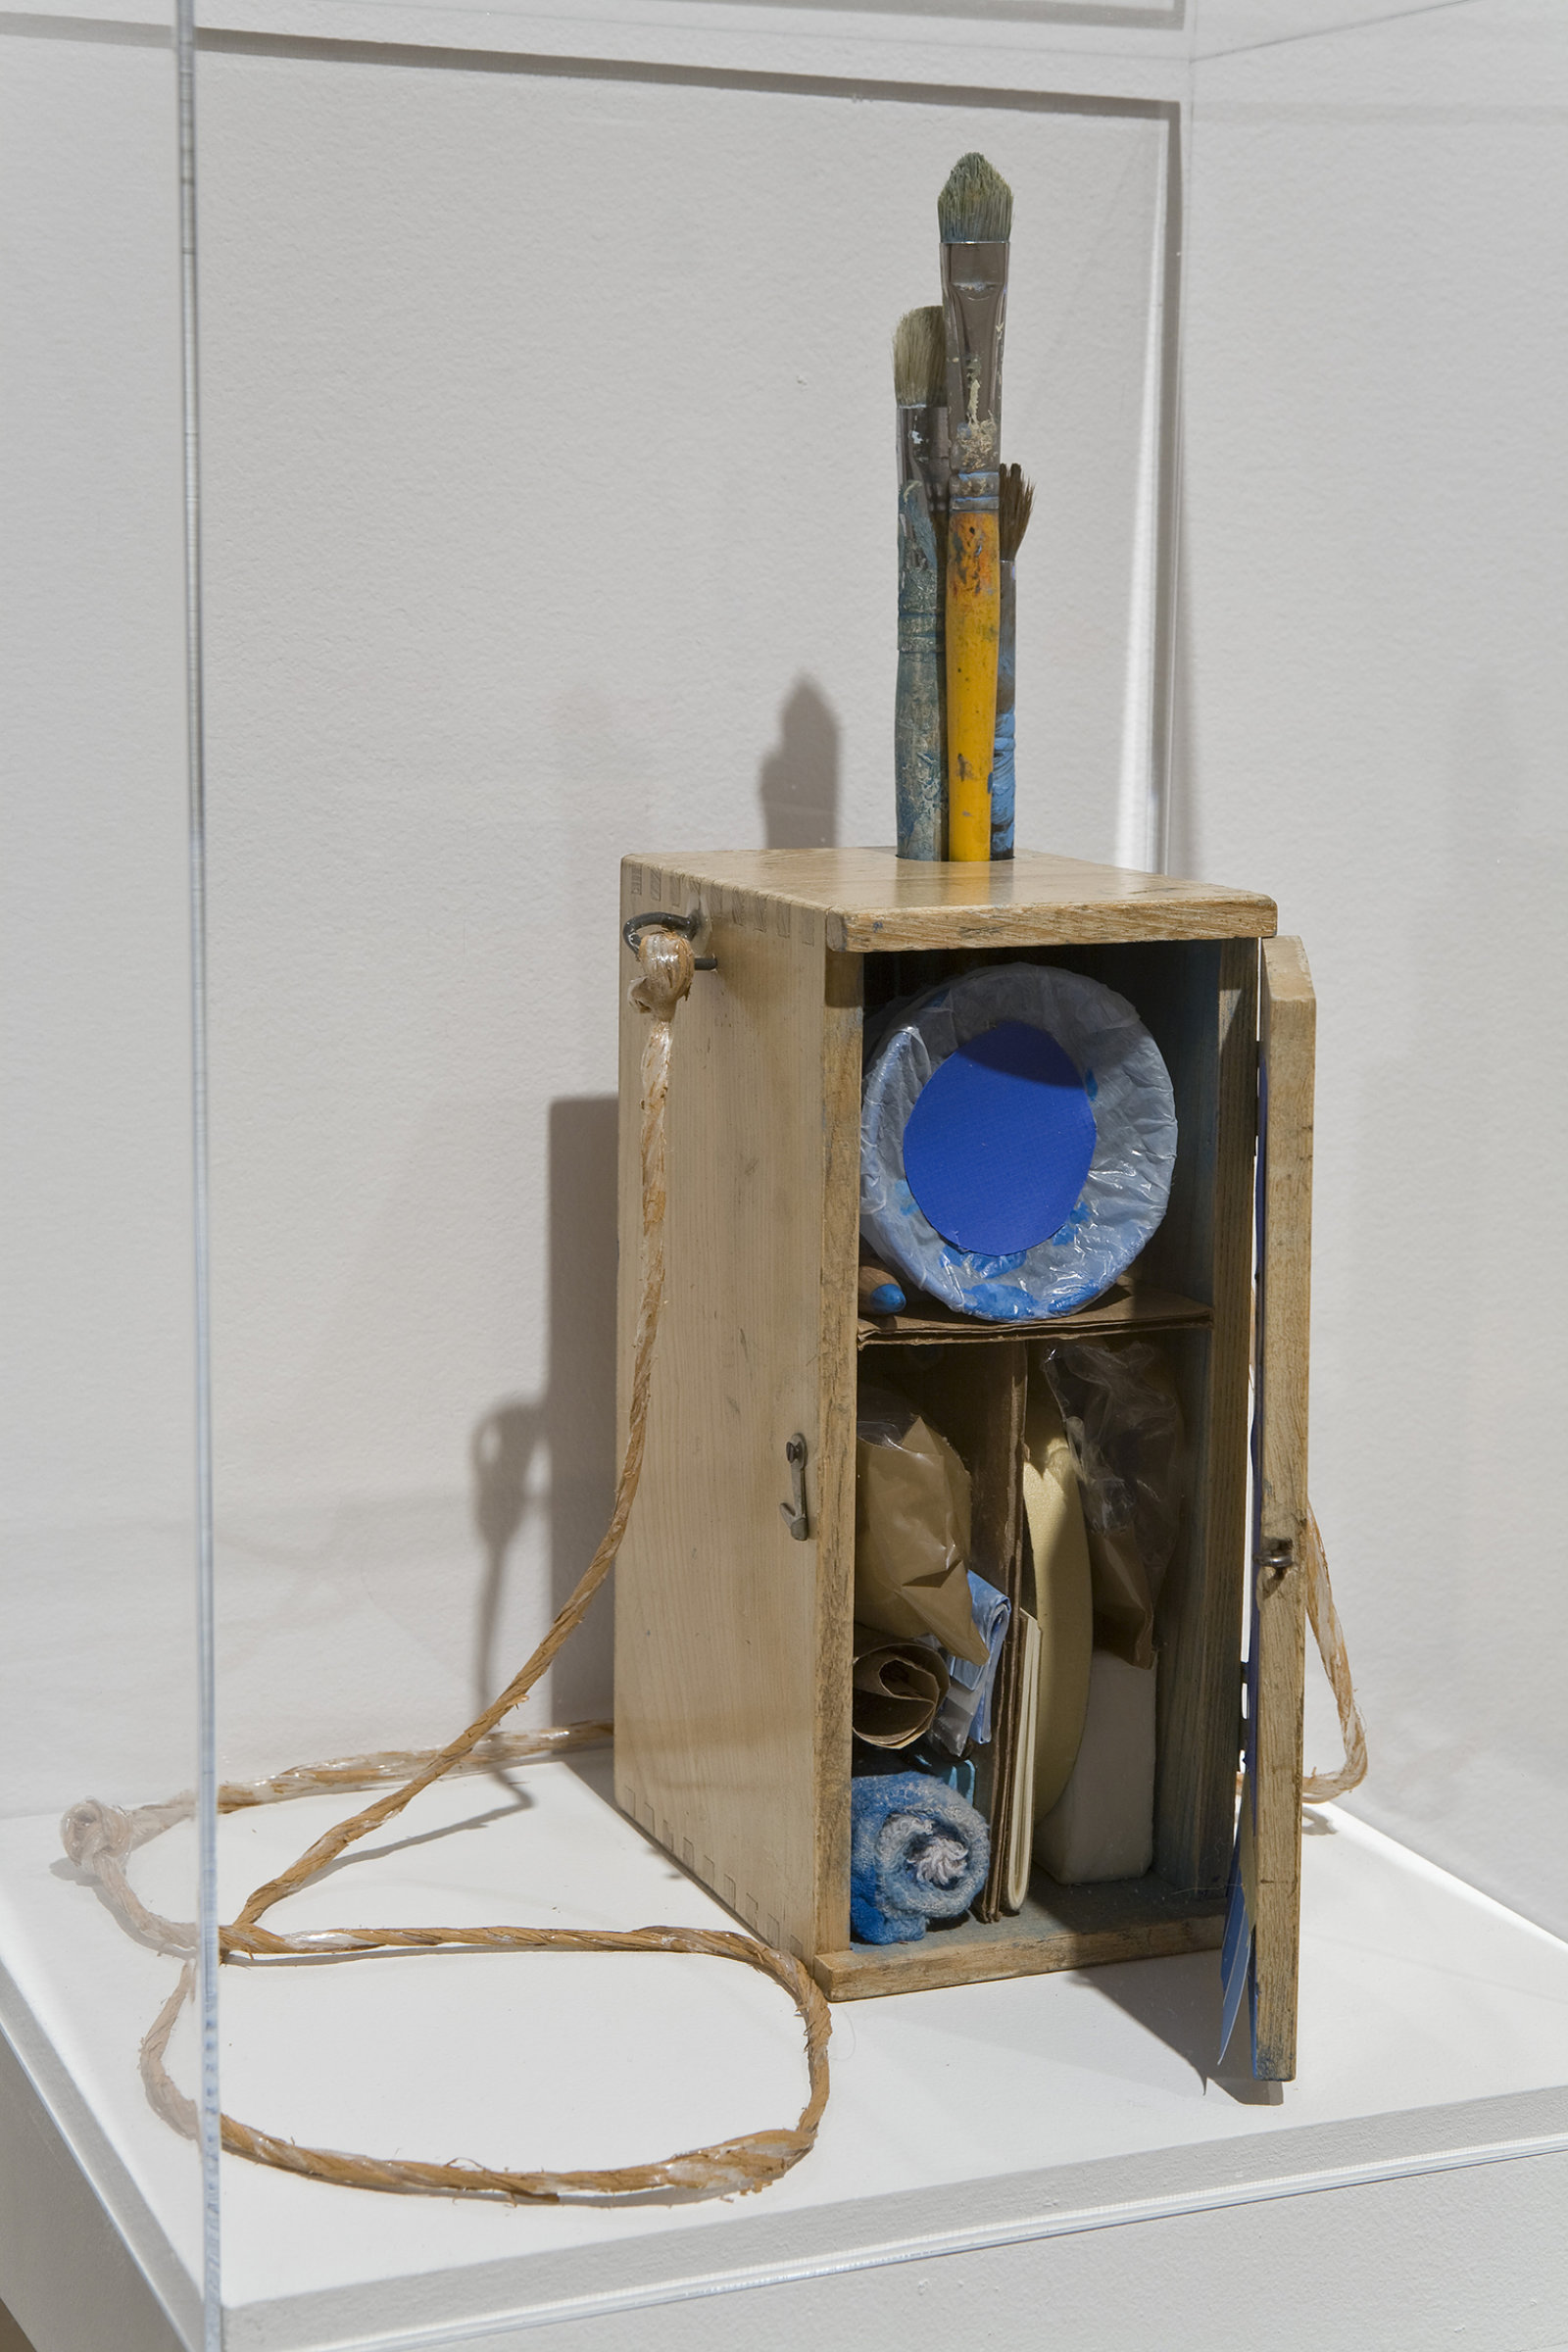 Geoffrey Farmer, Void Numbering Project (continuous), 1992, wooden box containing various materials such as paint, paintbrushes, masking tape and shelf with plexiglass top, dimensions variable